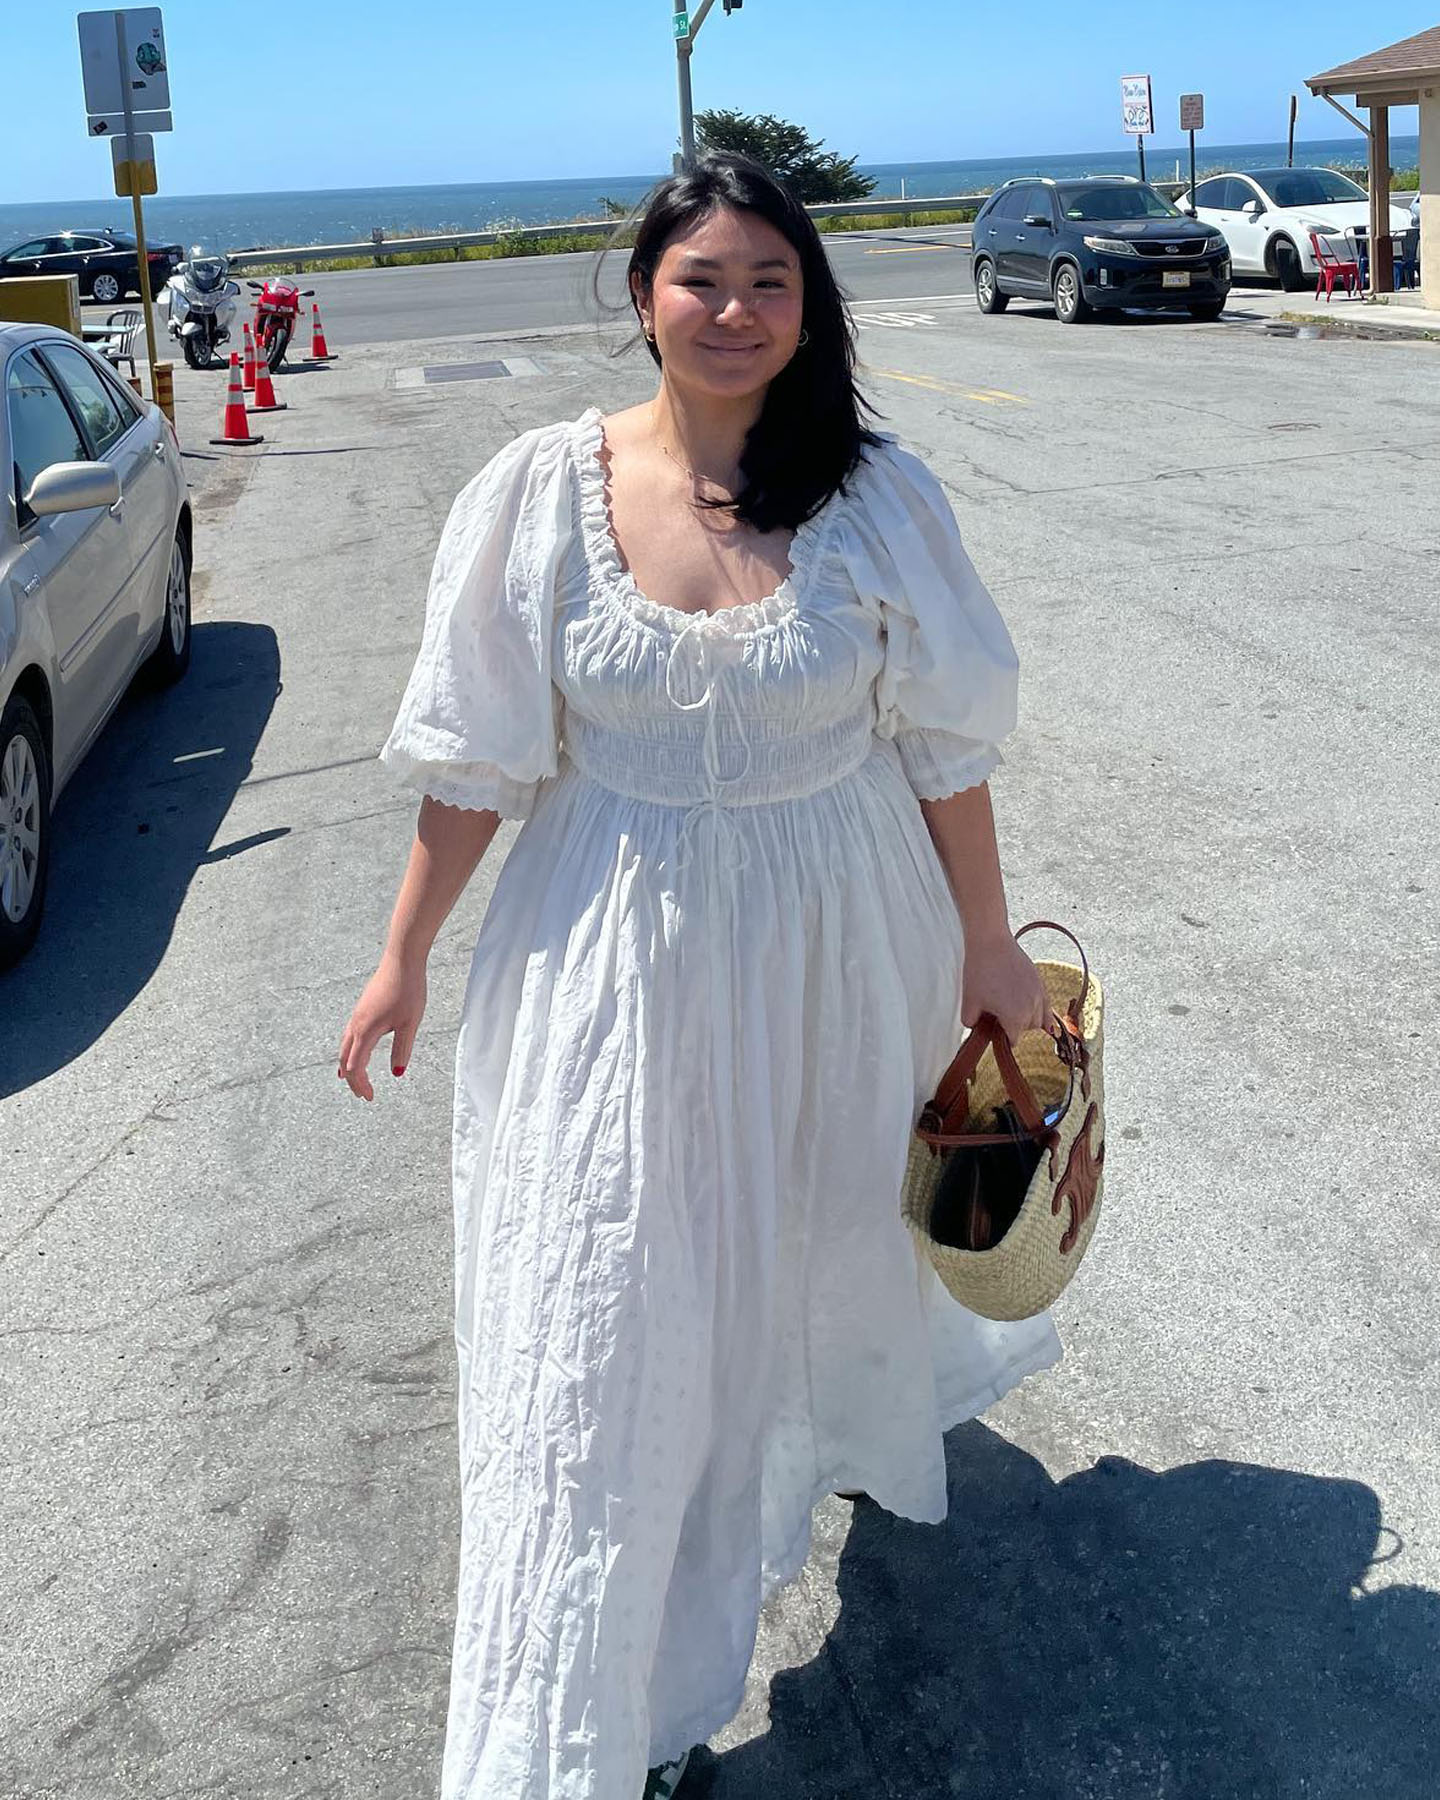 Mid-size fashion influencer Marina Torres walks on the streets of a beachside town wearing a puff-sleeve white dress.